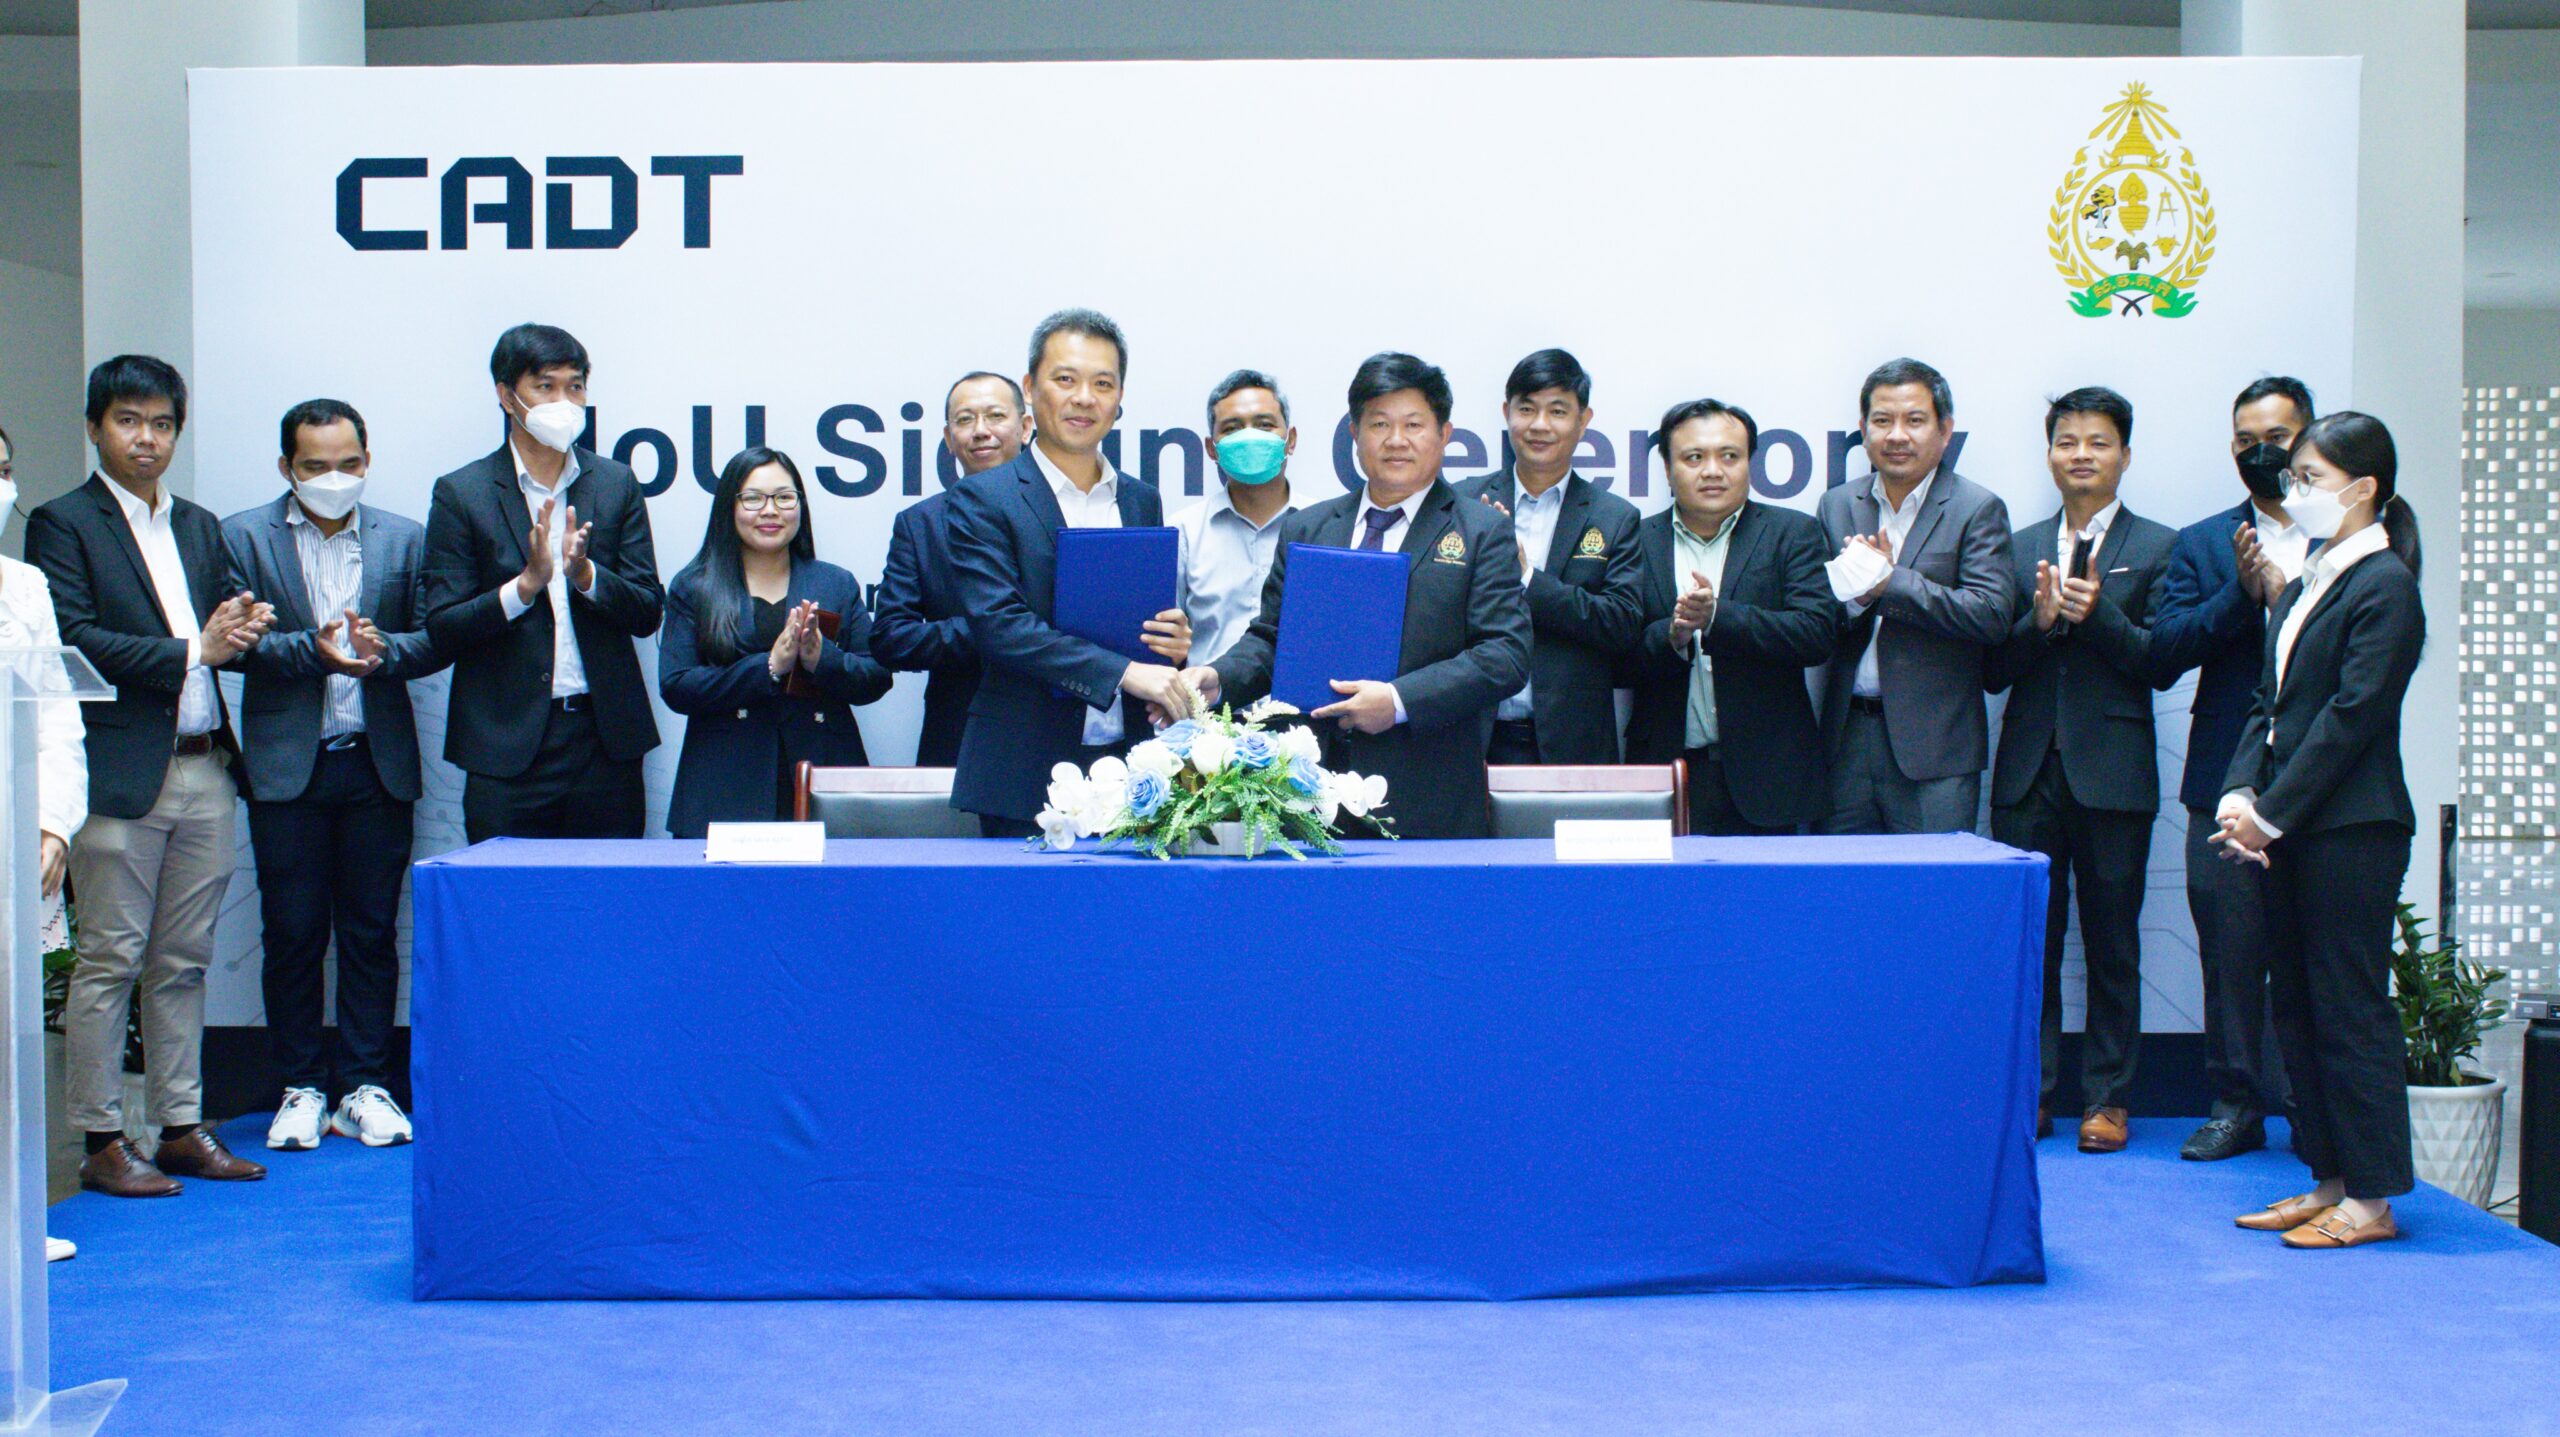 CADT & RUA SIGNED TO ENHANCE INTEGRATION BETWEEN AGRICULTURE AND TECHNOLOGY